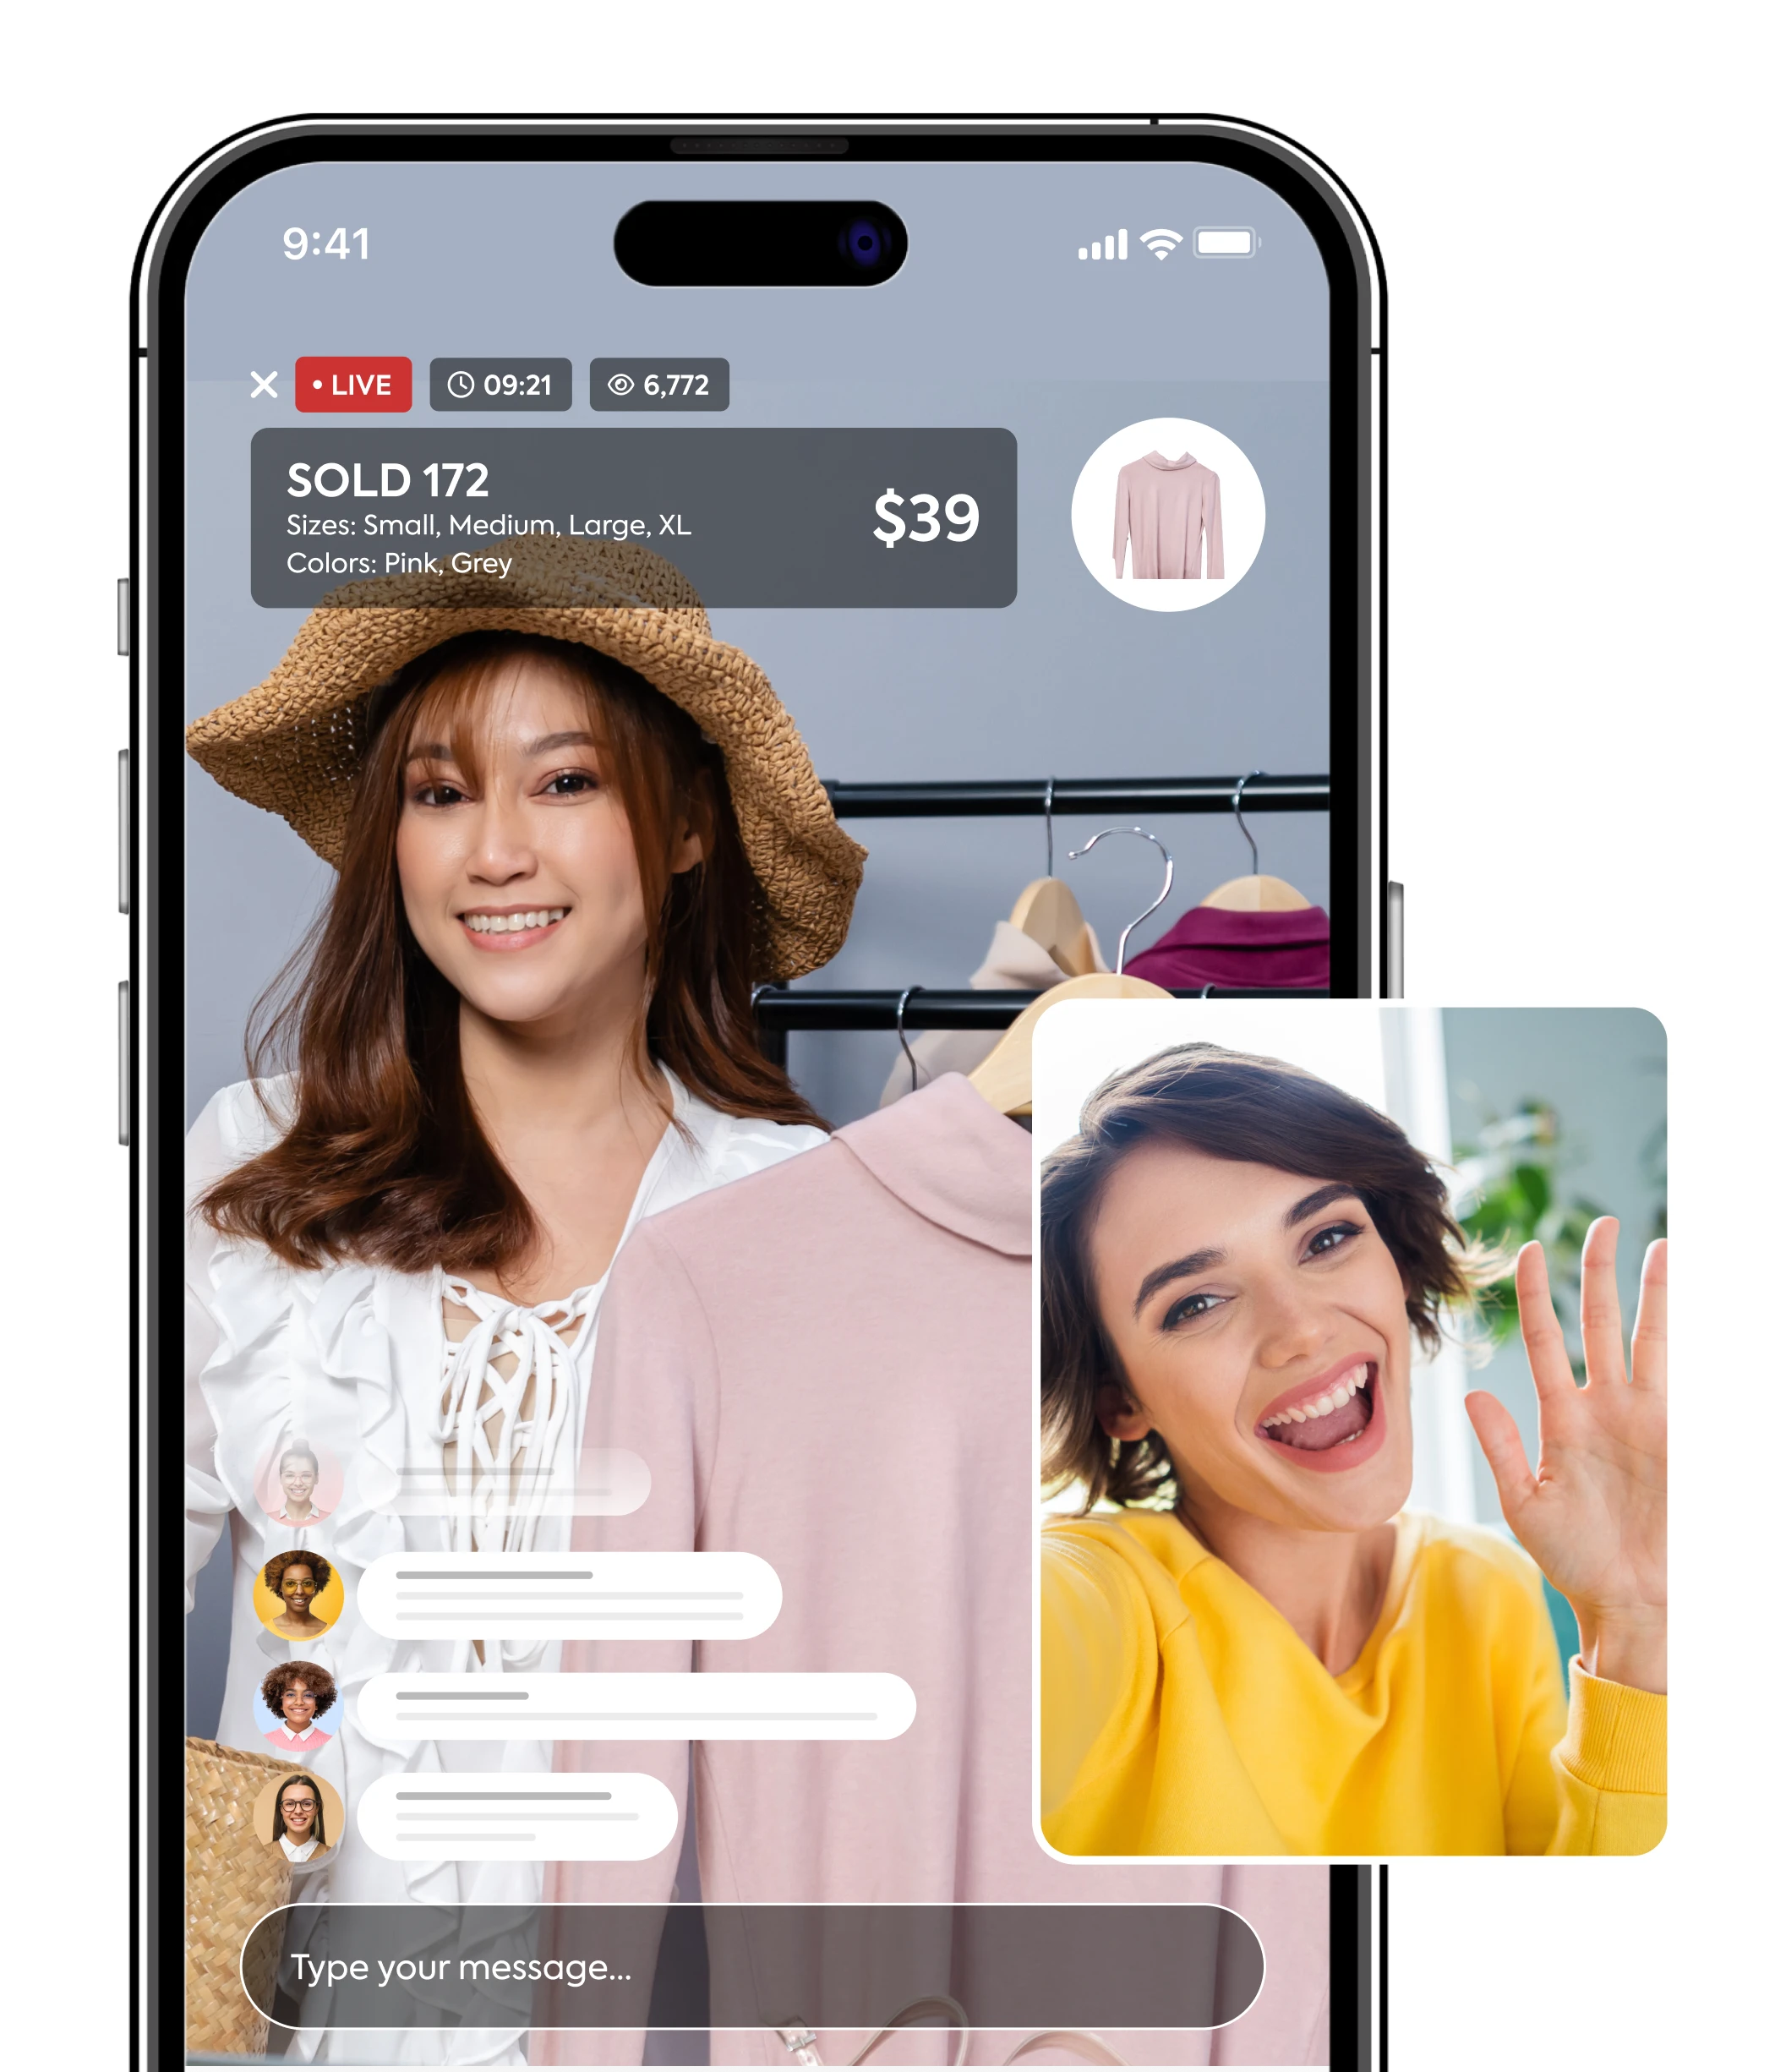 Transform Your shopify Store into a Dynamic Mobile App